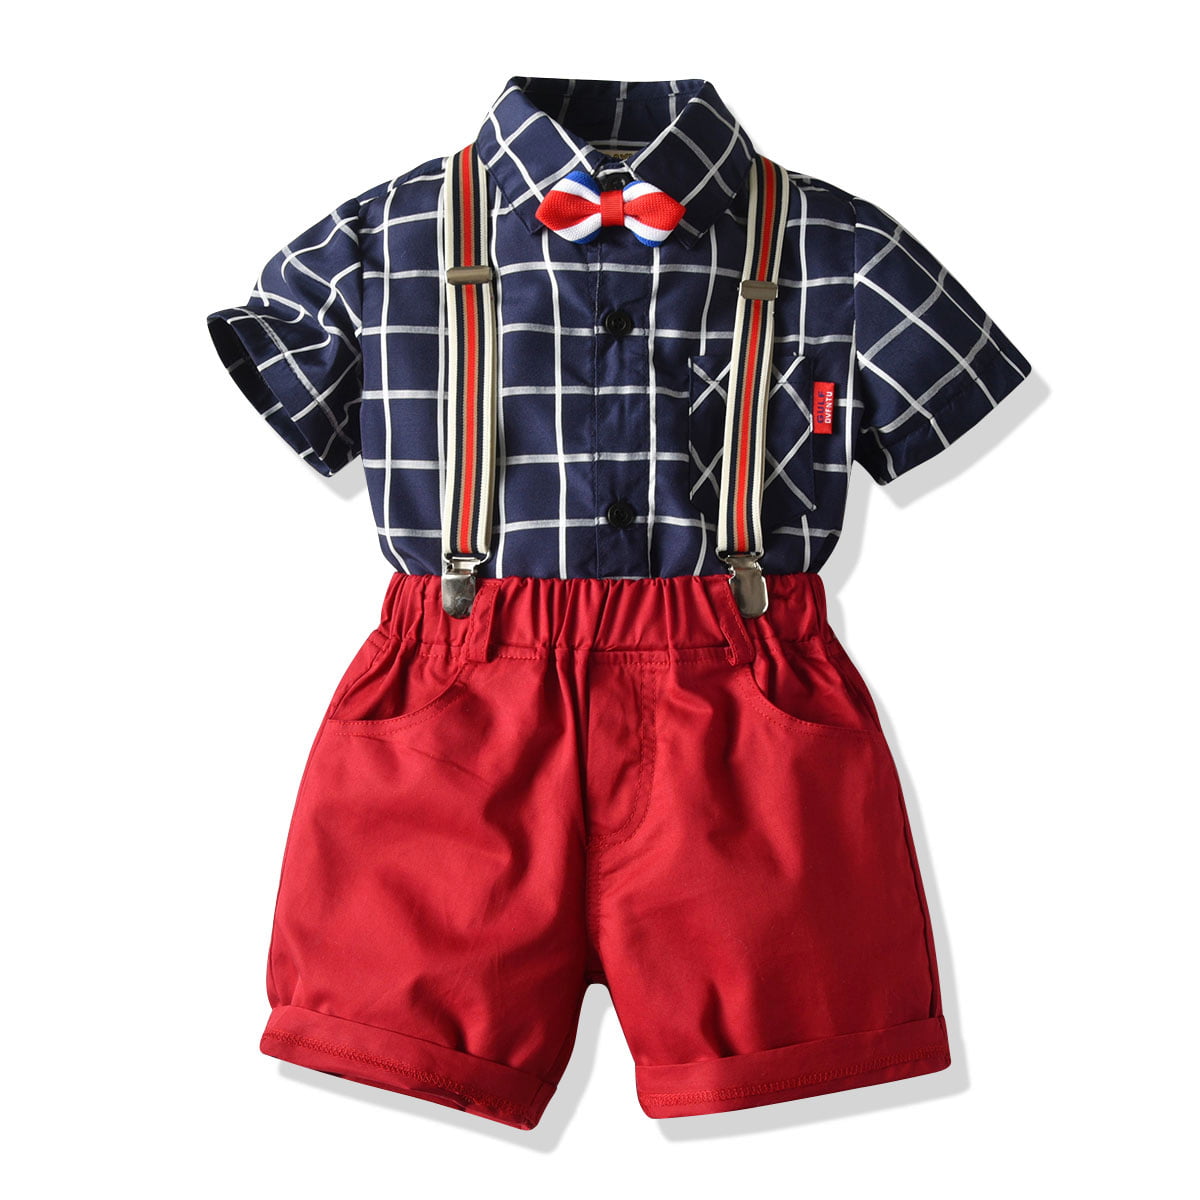 Toddler Baby Boys Outfits Infant 2PC Sets Summer Plaids T-shirt Short Overalls 